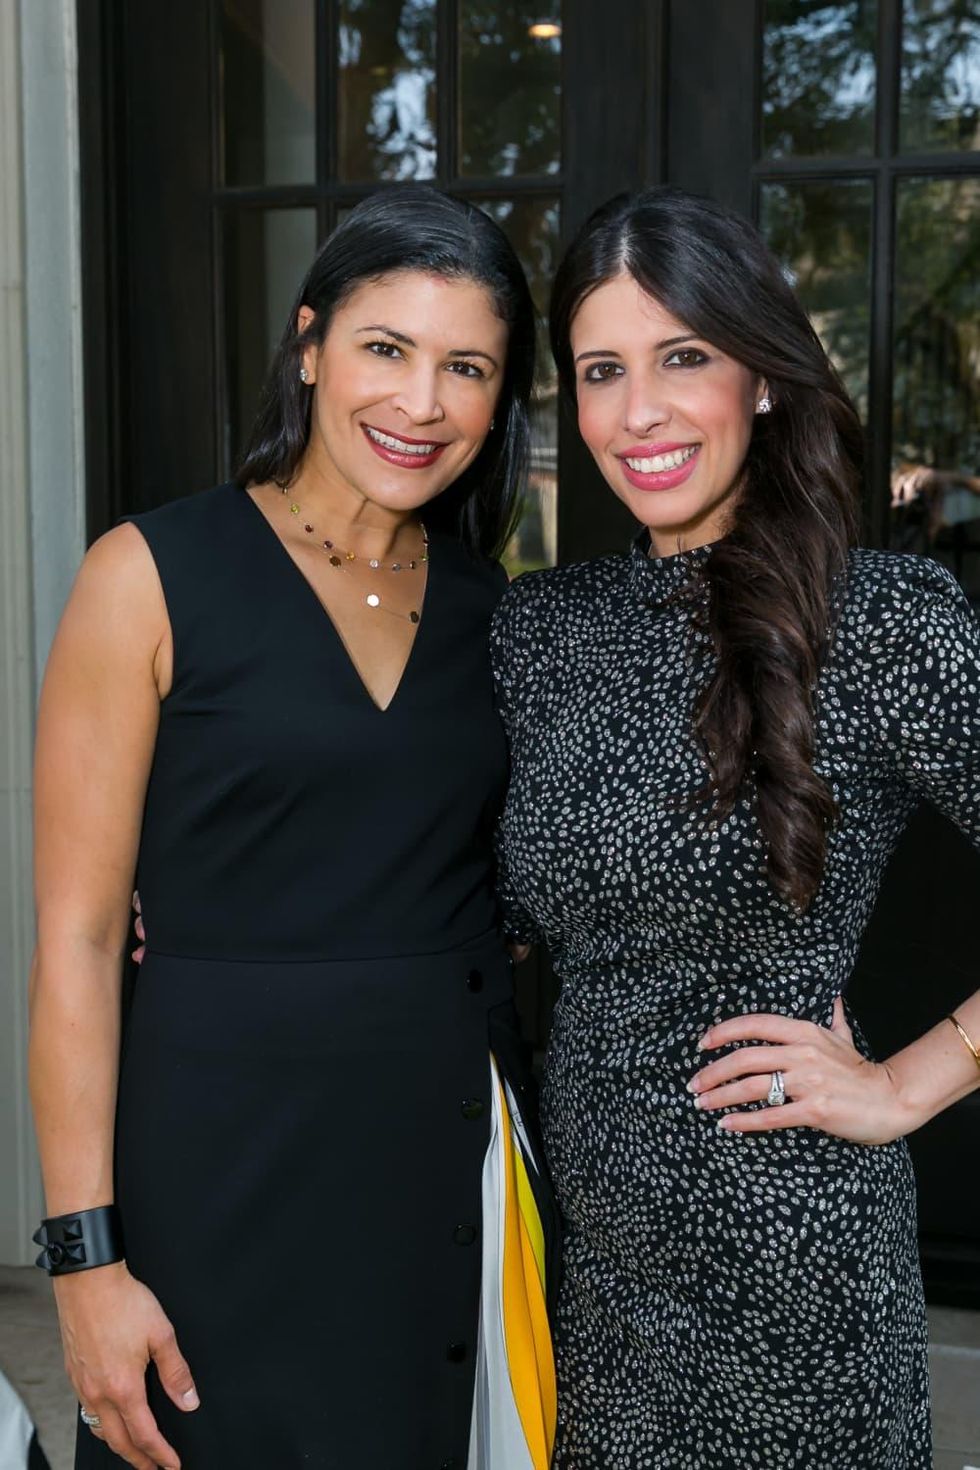 Homemade Hope Home is where the heart is gala 2020 Gala Honorees Maria Vilchez Lowery, Kristy Bradshaw